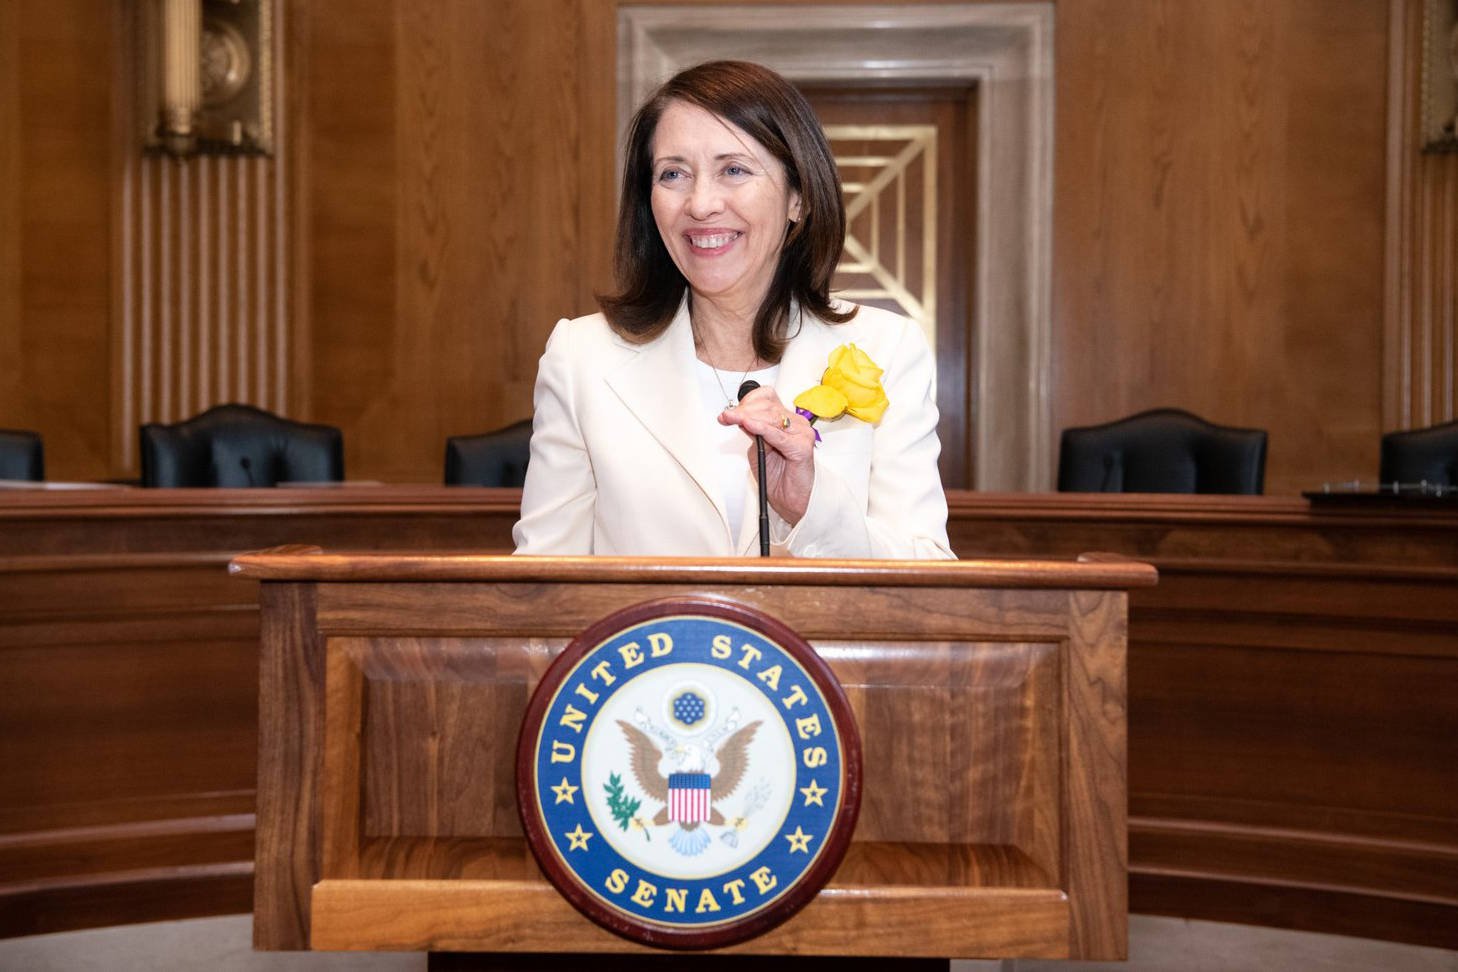 Sen. Maria Cantwell (D-WA) speaks at a Housing Advocacy meeting in this file photo from her website.